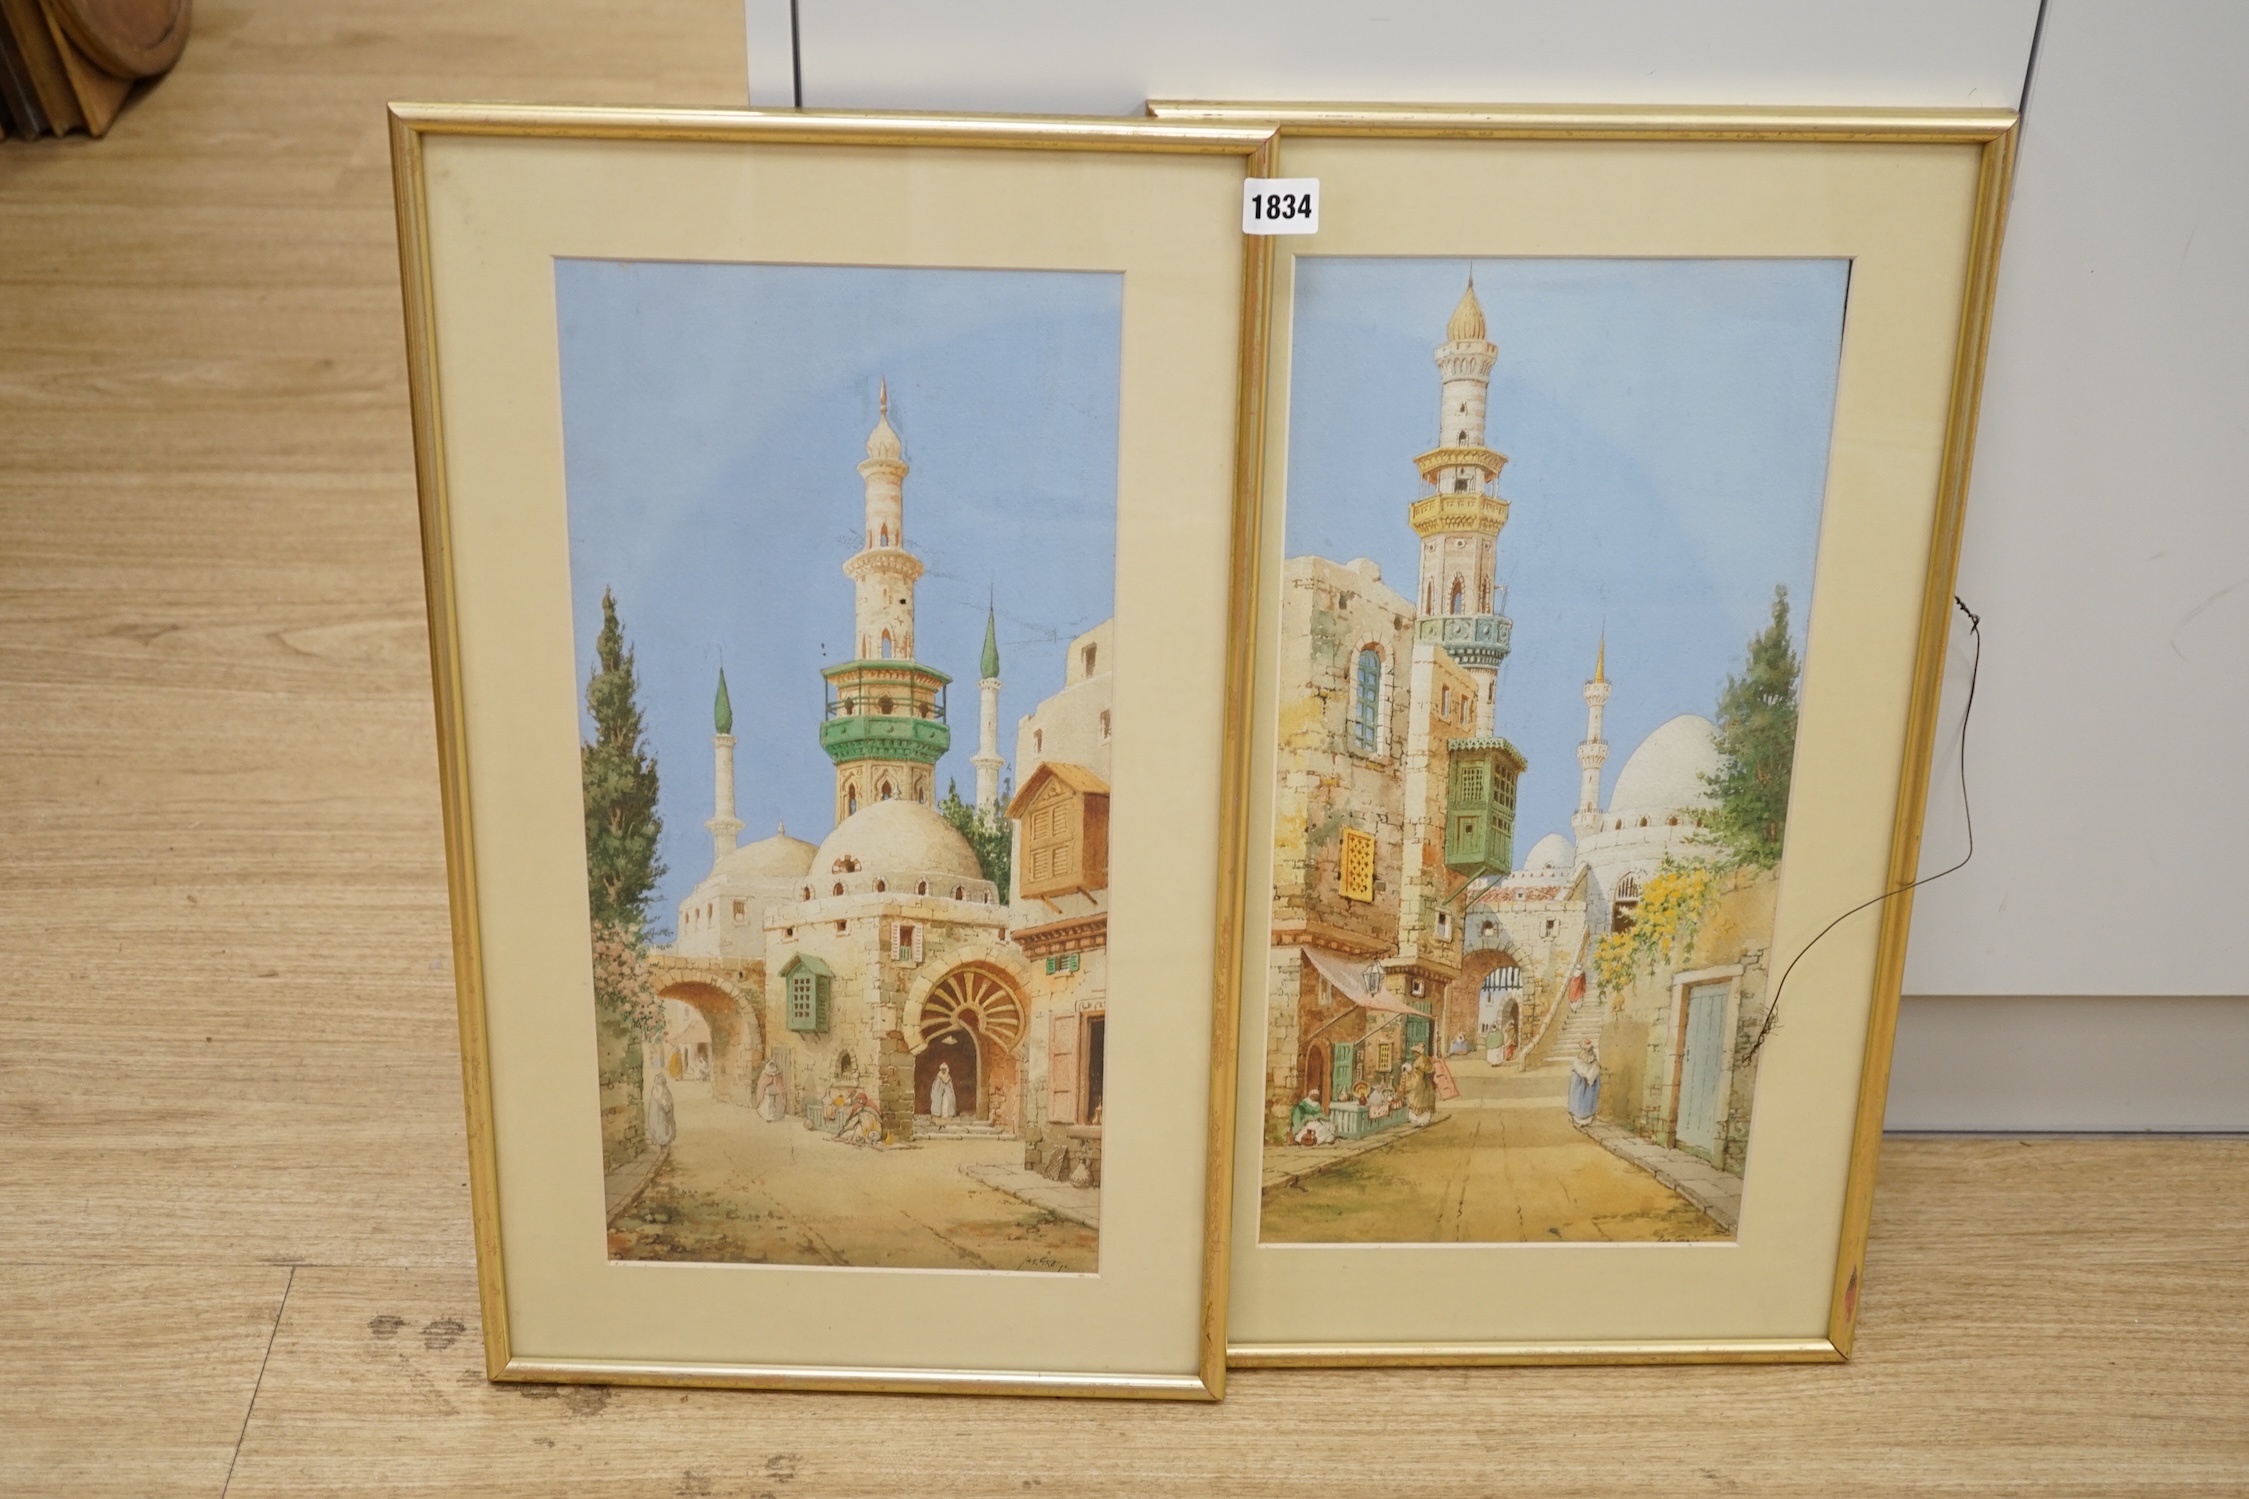 James Greig (1861-1941), pair of Orientalist watercolours, Middle eastern street scenes with mosques, each signed, 47 x 22cm. Condition - good